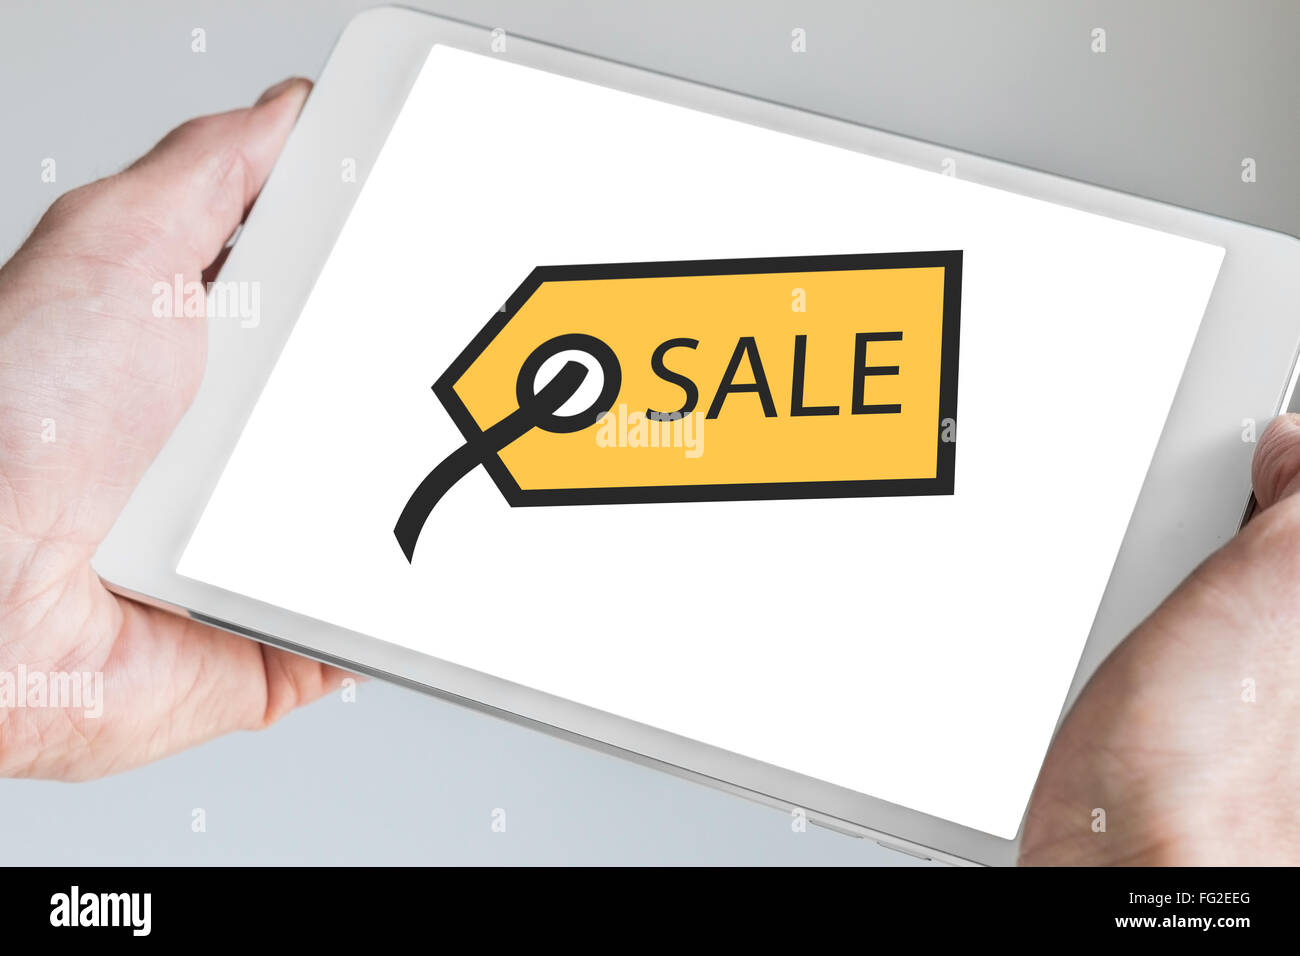 Sales tag symbol displayed on touchscreen of modern mobile device like tablet. Concept for mobile shopping and digital marketing Stock Photo